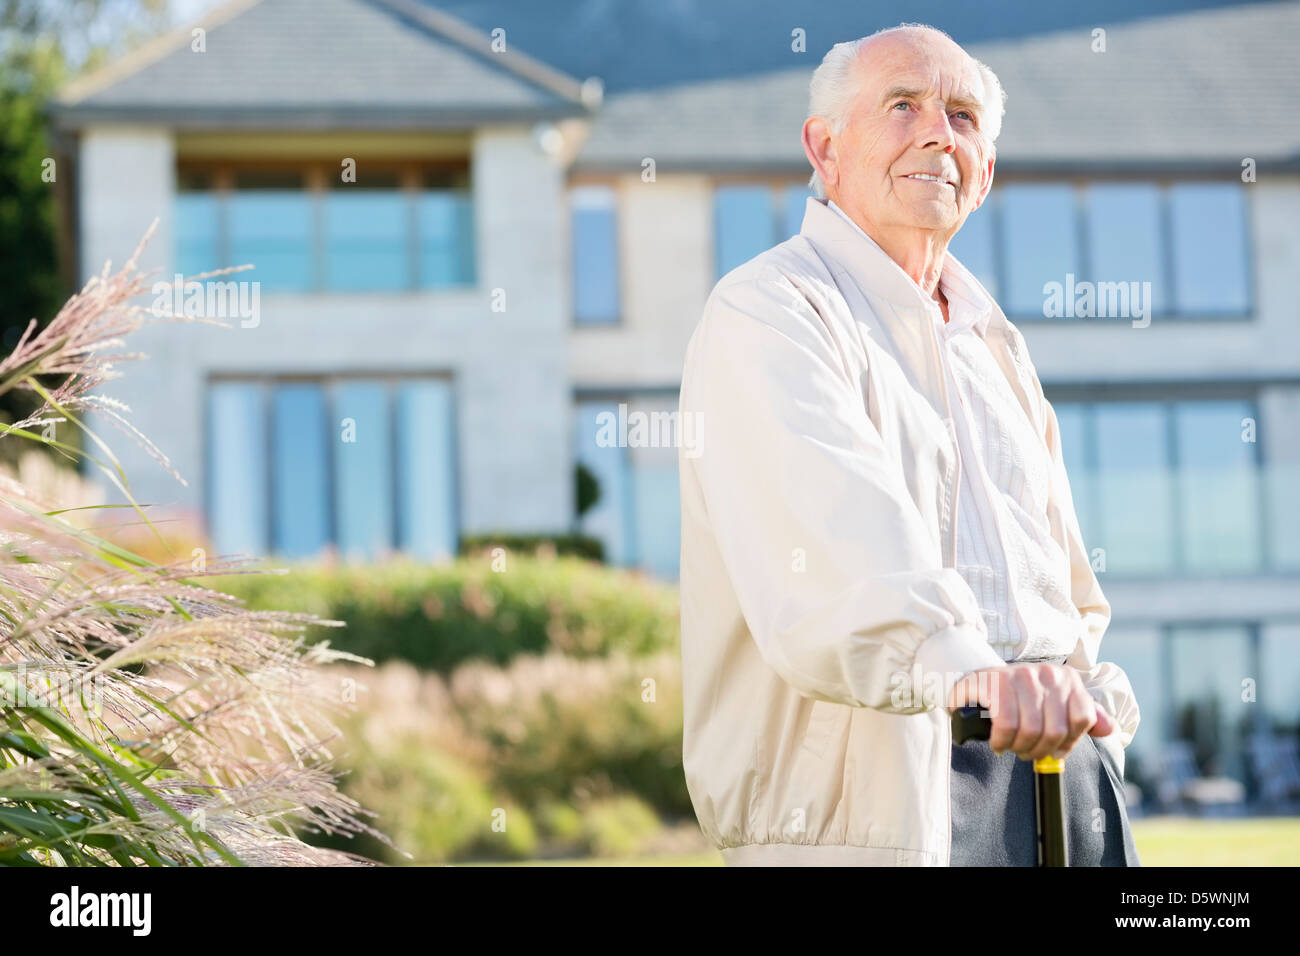 Older man walking with cane outdoors Stock Photo